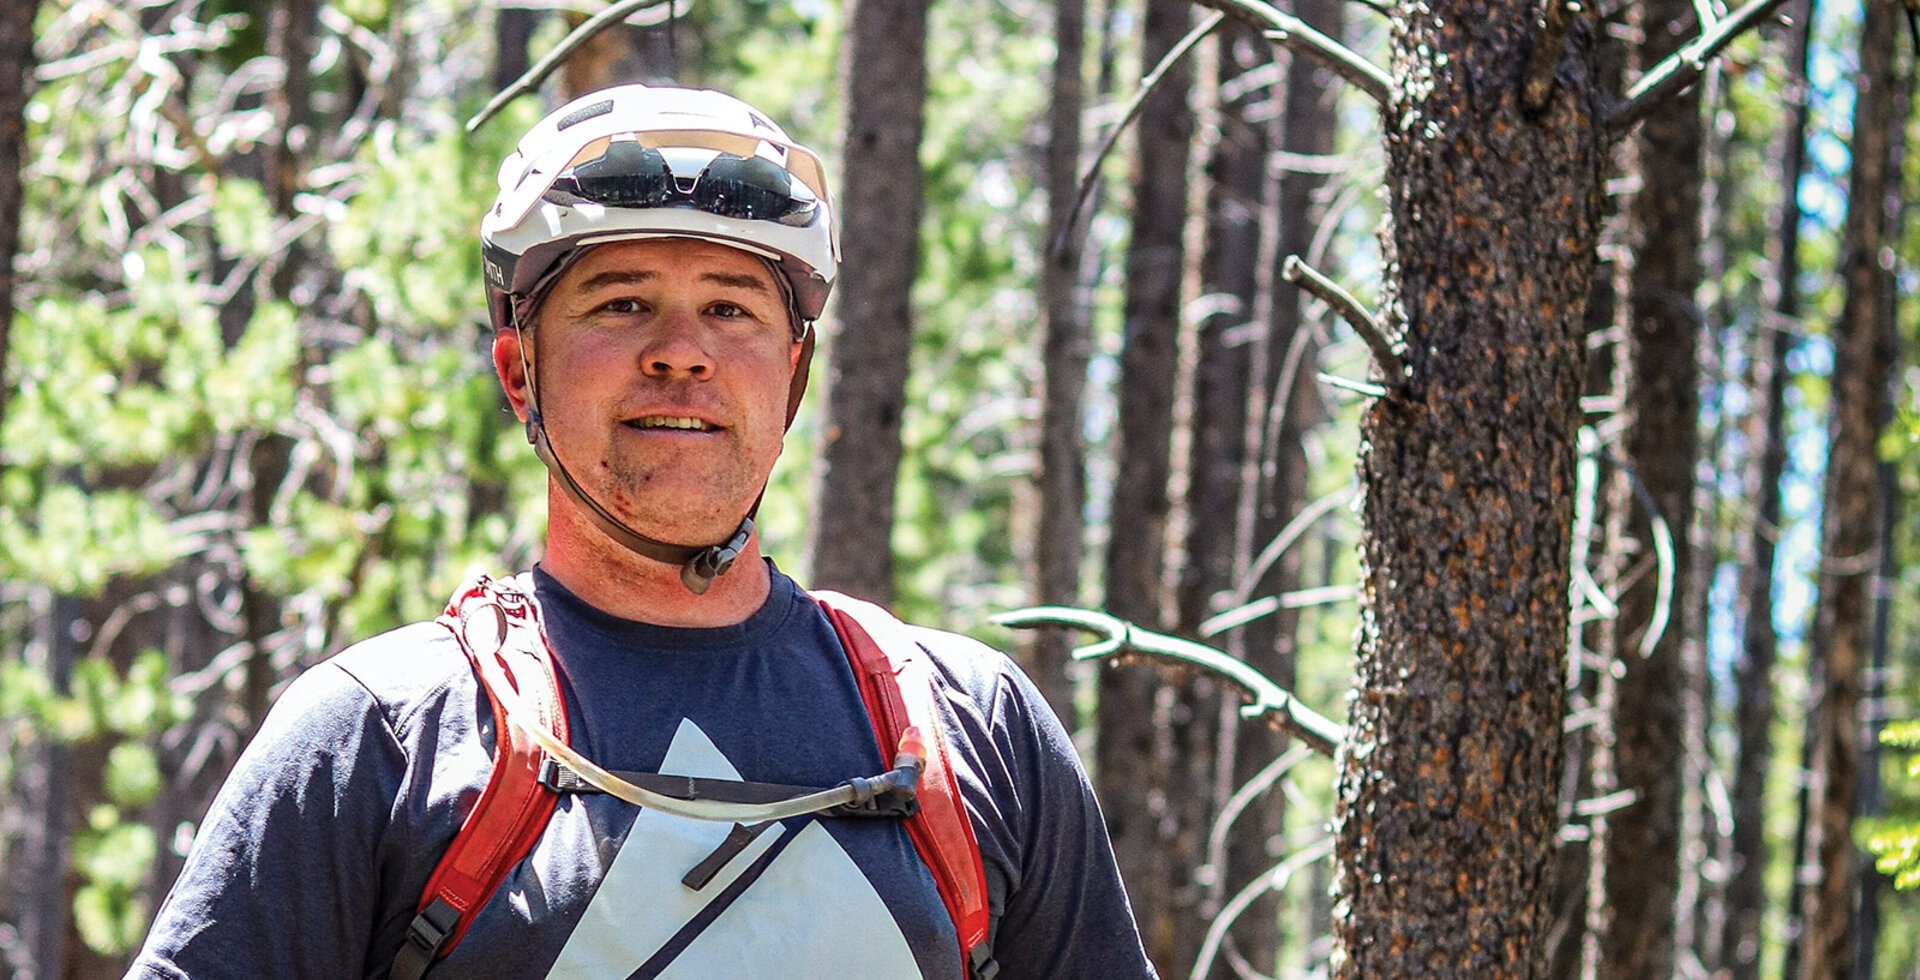 Originally a road racer from Indiana, Greg Mazu transitioned from pavement to dirt and went on to found Singletrack Trails, a Colorado-based trailbuilding company with over 1,000 miles of trail design and construction in its portfolio. Photo: Bergen Khare